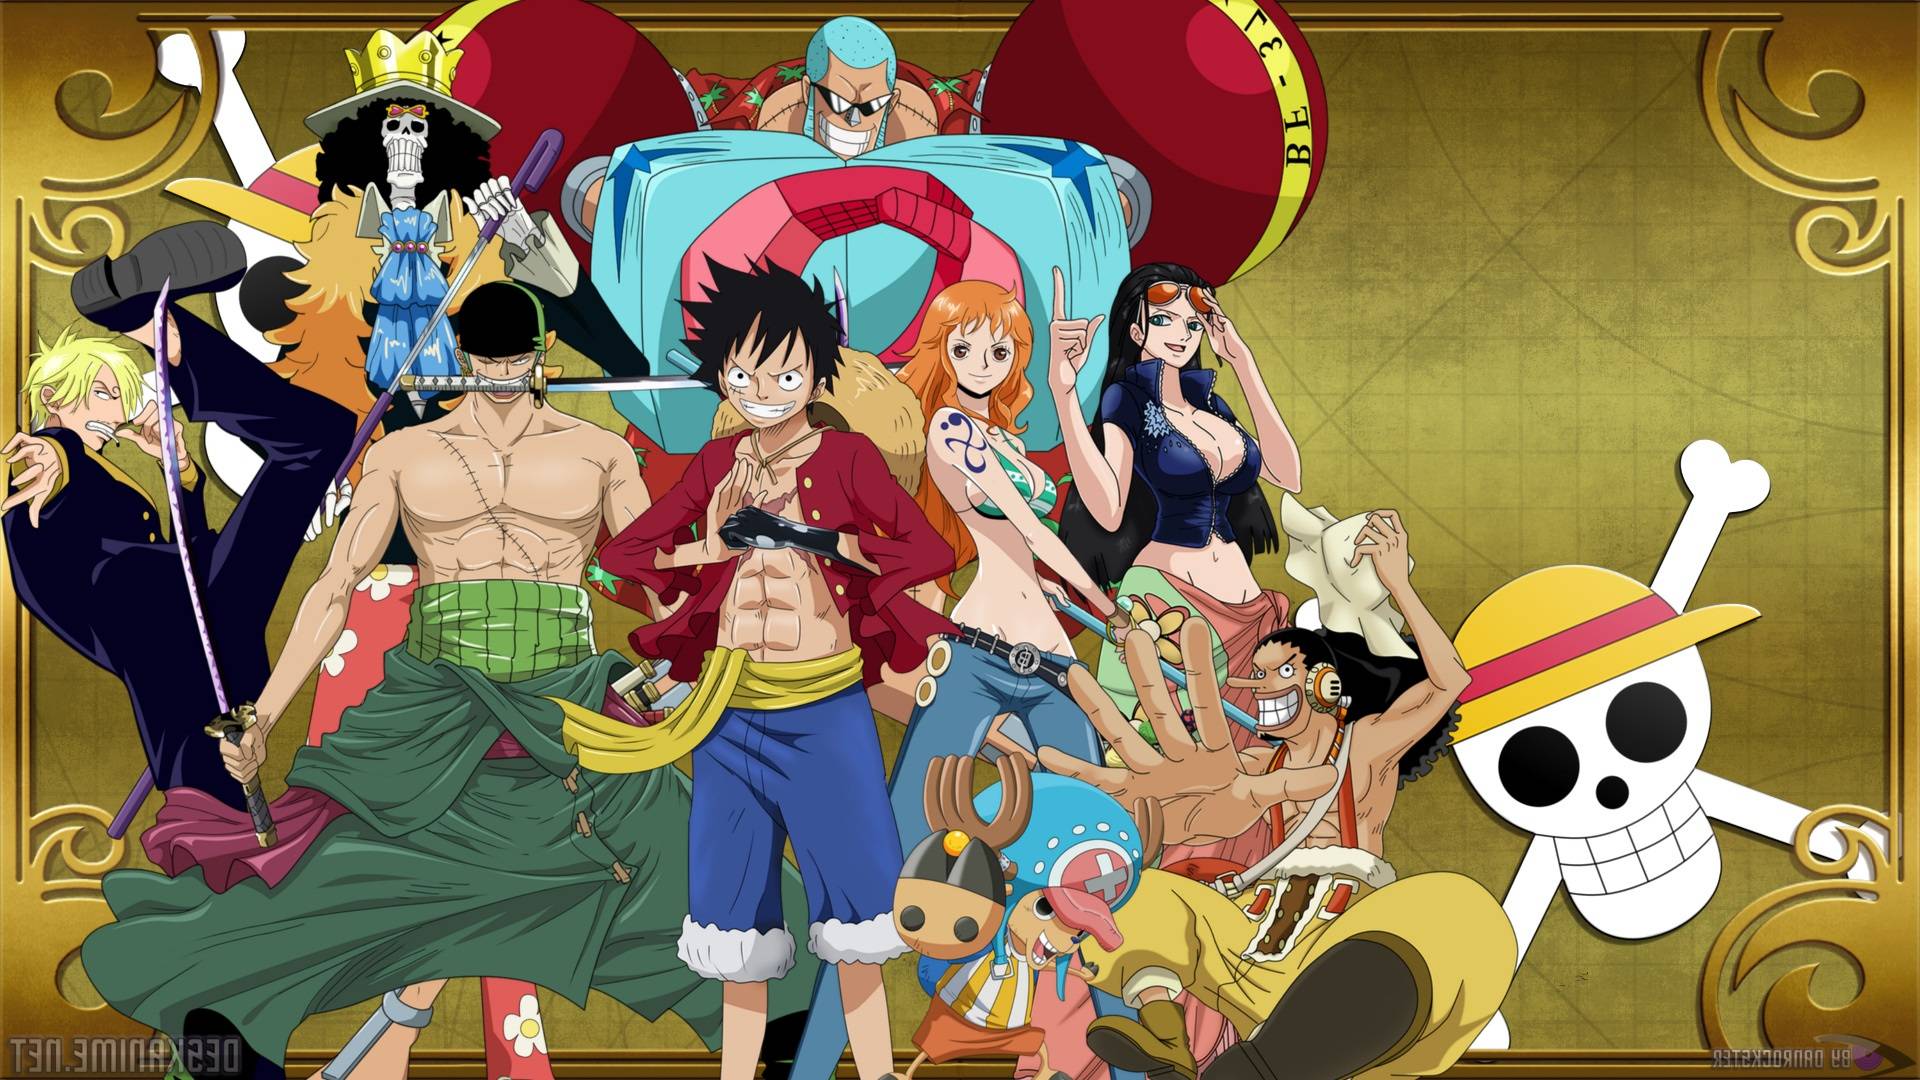 One Piece [4] wallpaper - Anime wallpapers - #6581